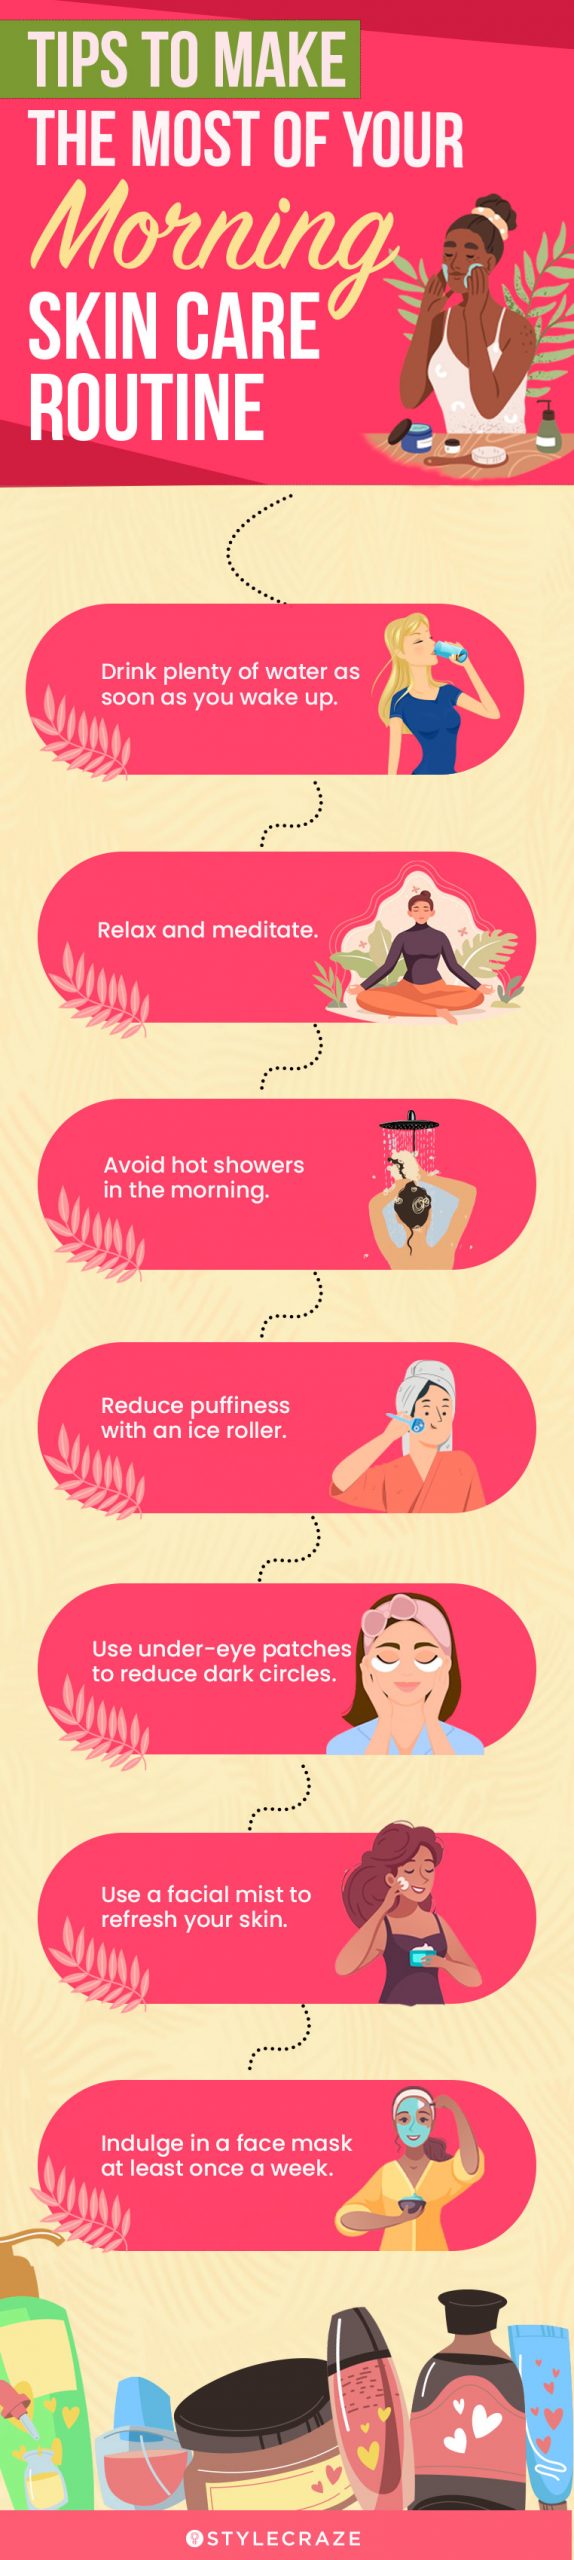 tips to make the most of your morning skin care routine (infographic)